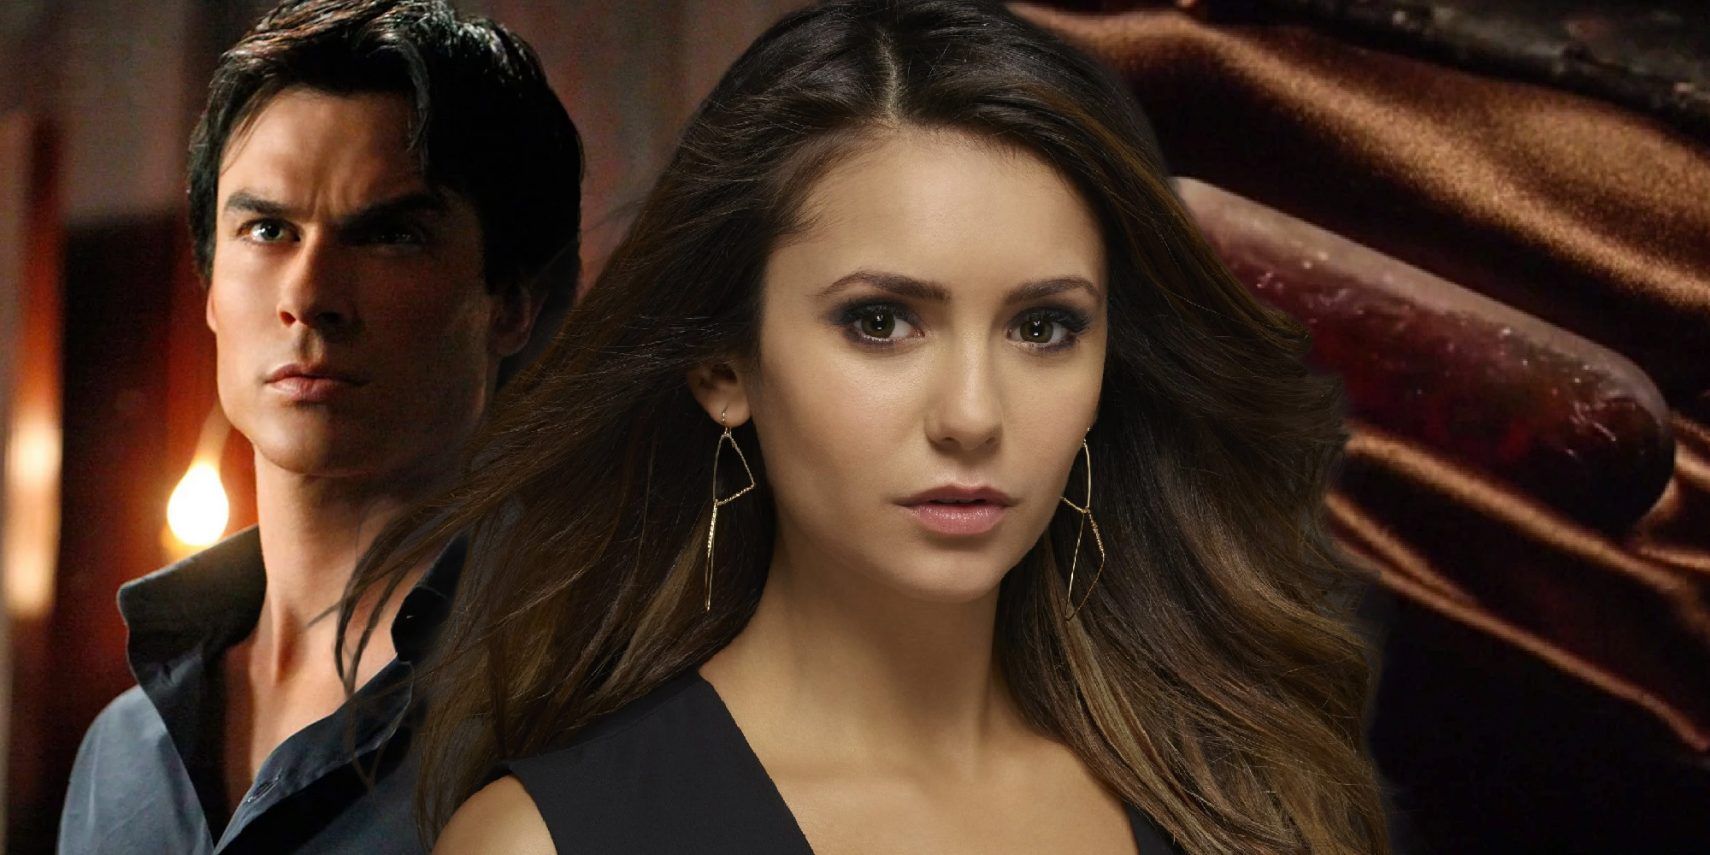 Vampire Diaries: All 4 Vampires Who Used The Cure (& What Happened)